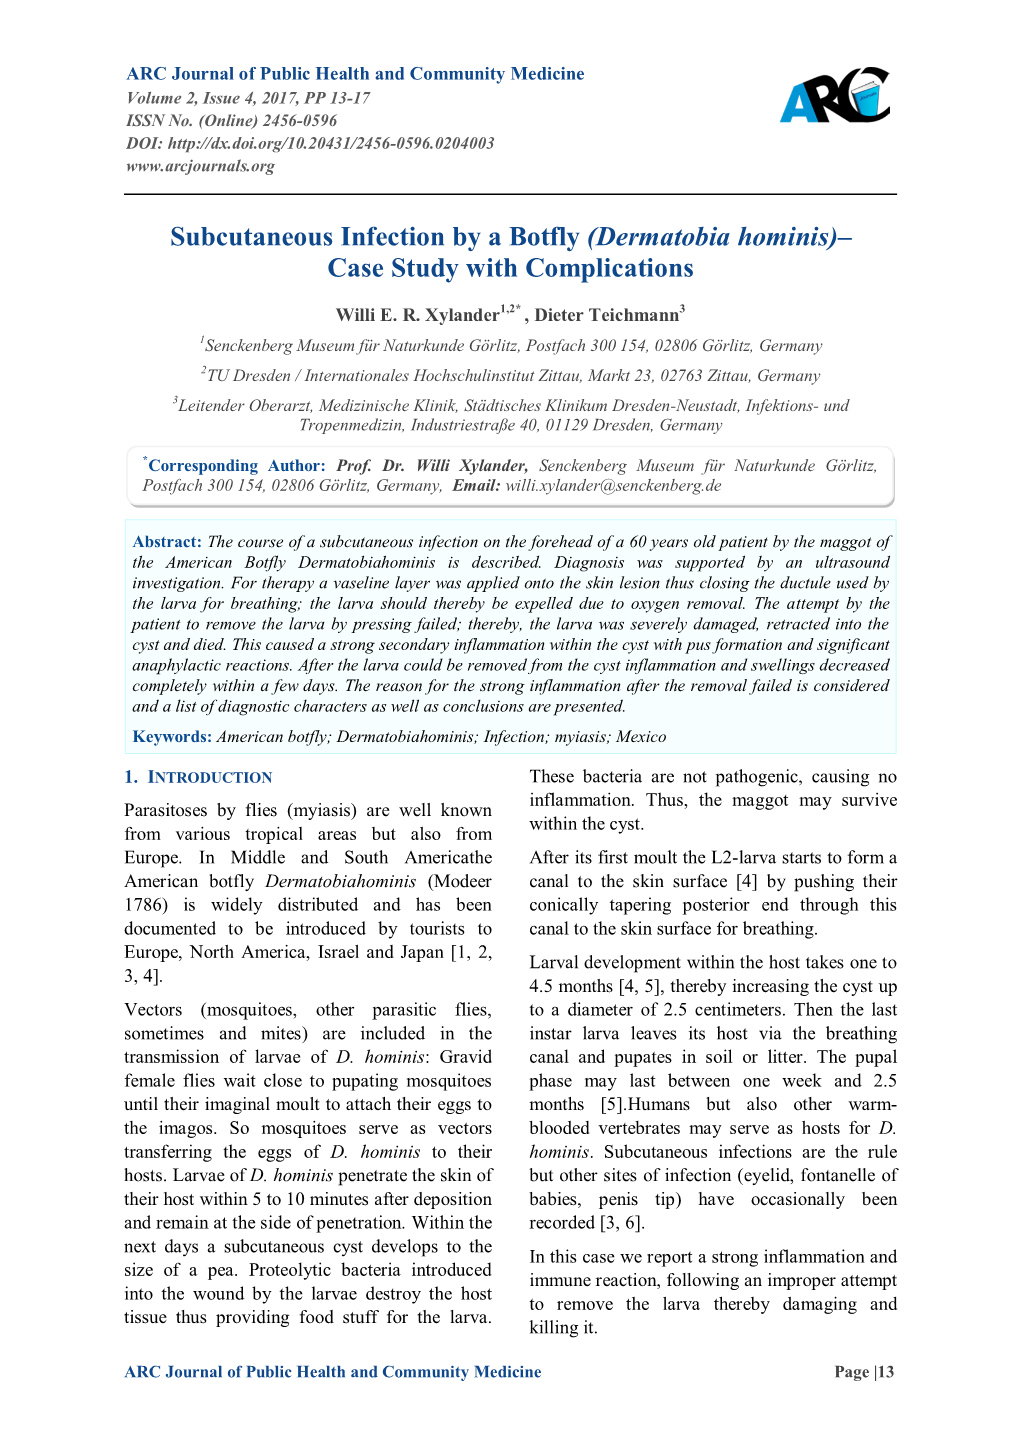 Subcutaneous Infection by a Botfly (Dermatobia Hominis)– Case Study with Complications